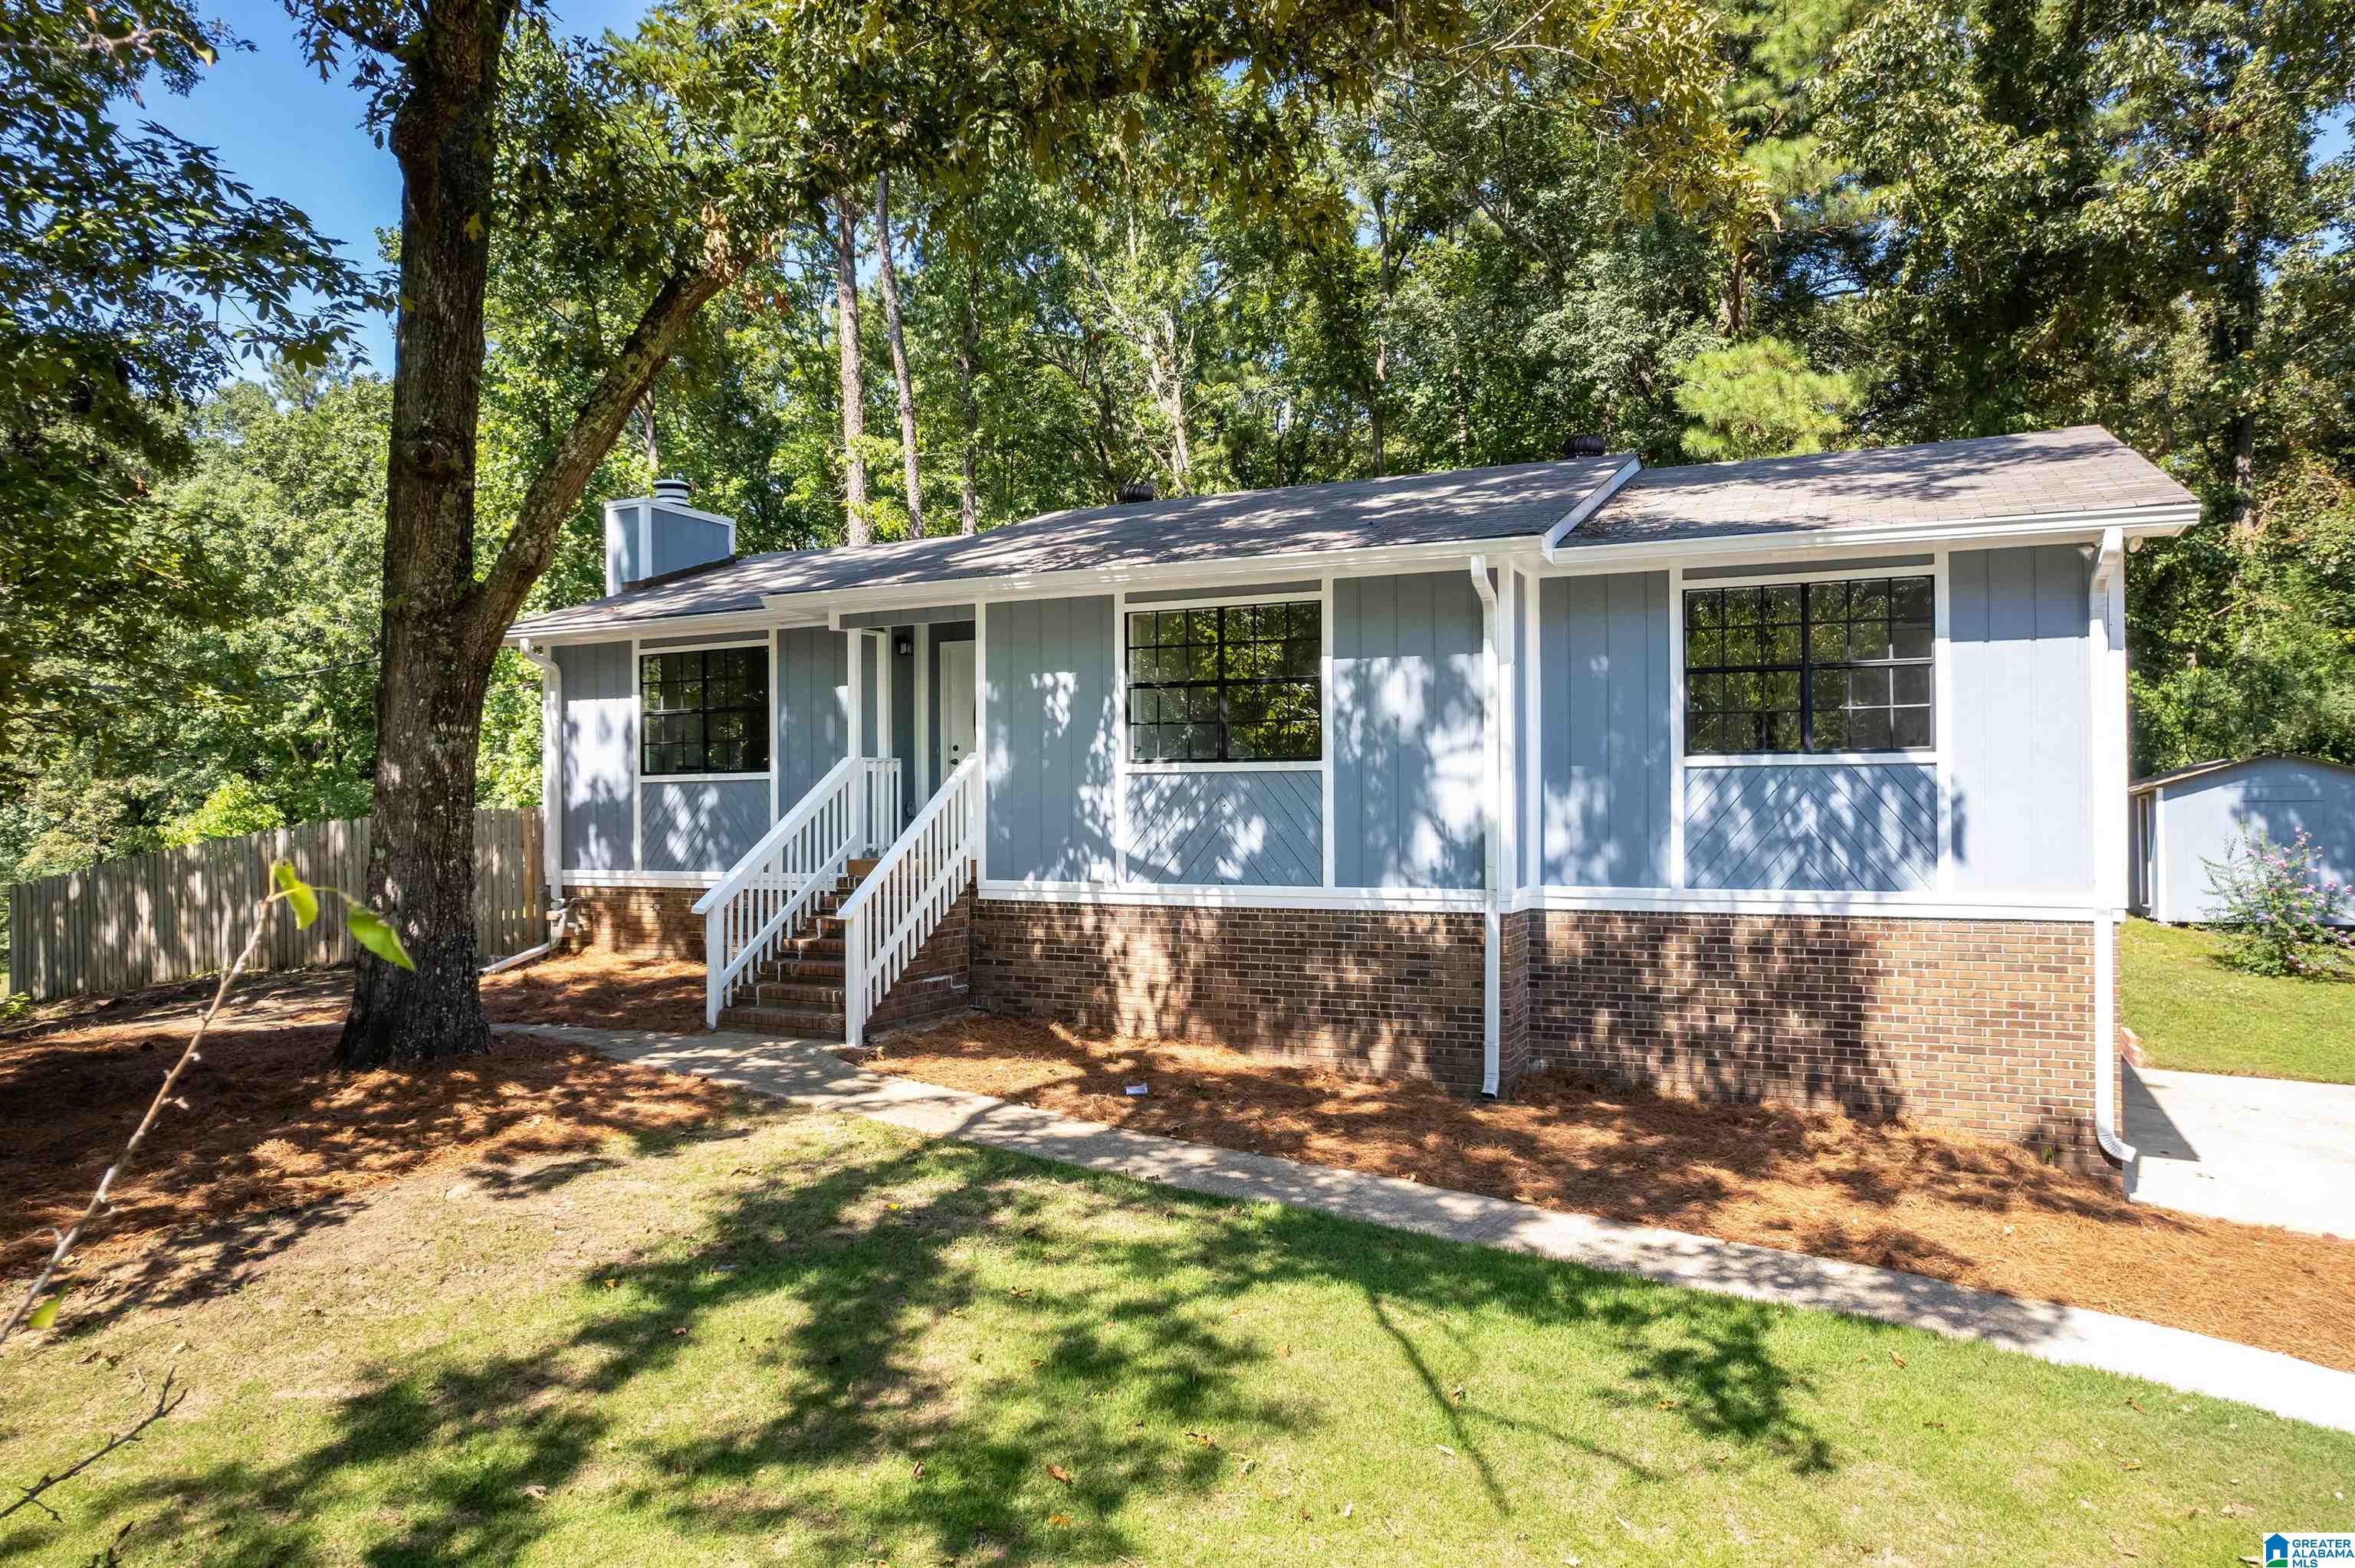 Look at this updated move in ready home!! All brand new. Top to to bottom. Master is spacious. Den downstairs is ready for entertaining. Screened deck overlooking fenced back yard